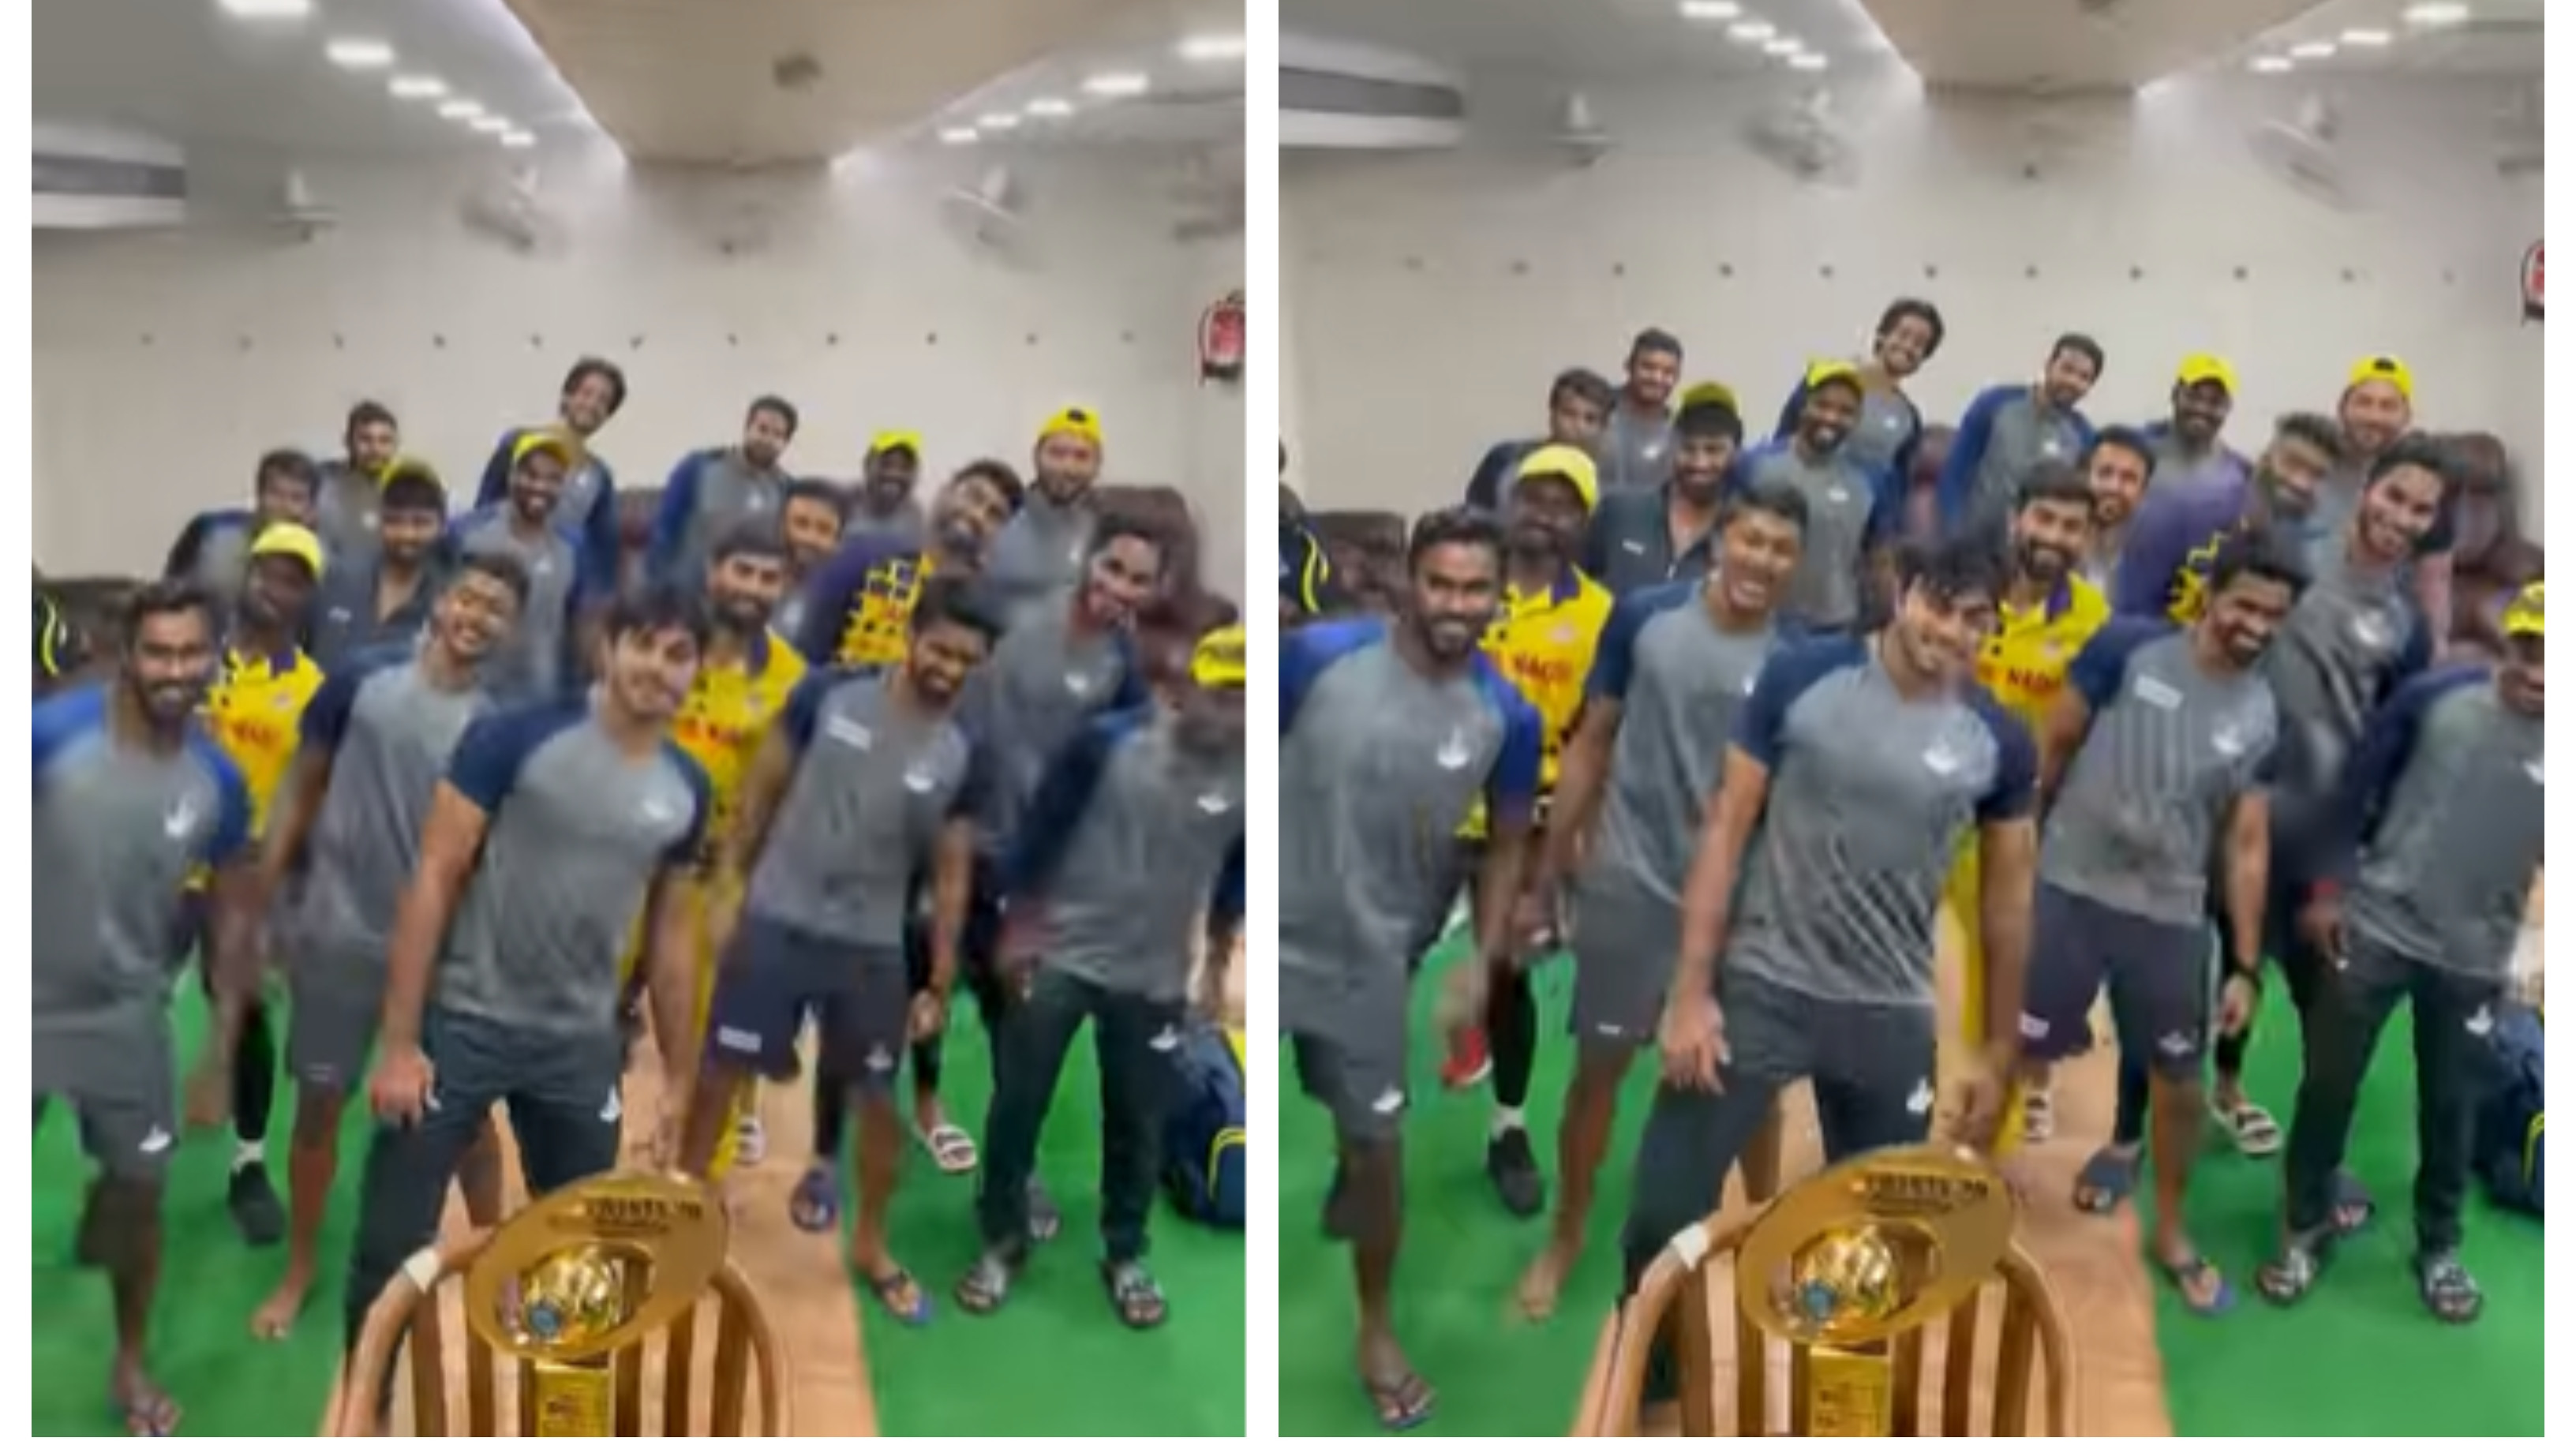 WATCH: Tamil Nadu players dance to ‘Vaathi Coming’ after clinching Syed Mushtaq Ali T20 title